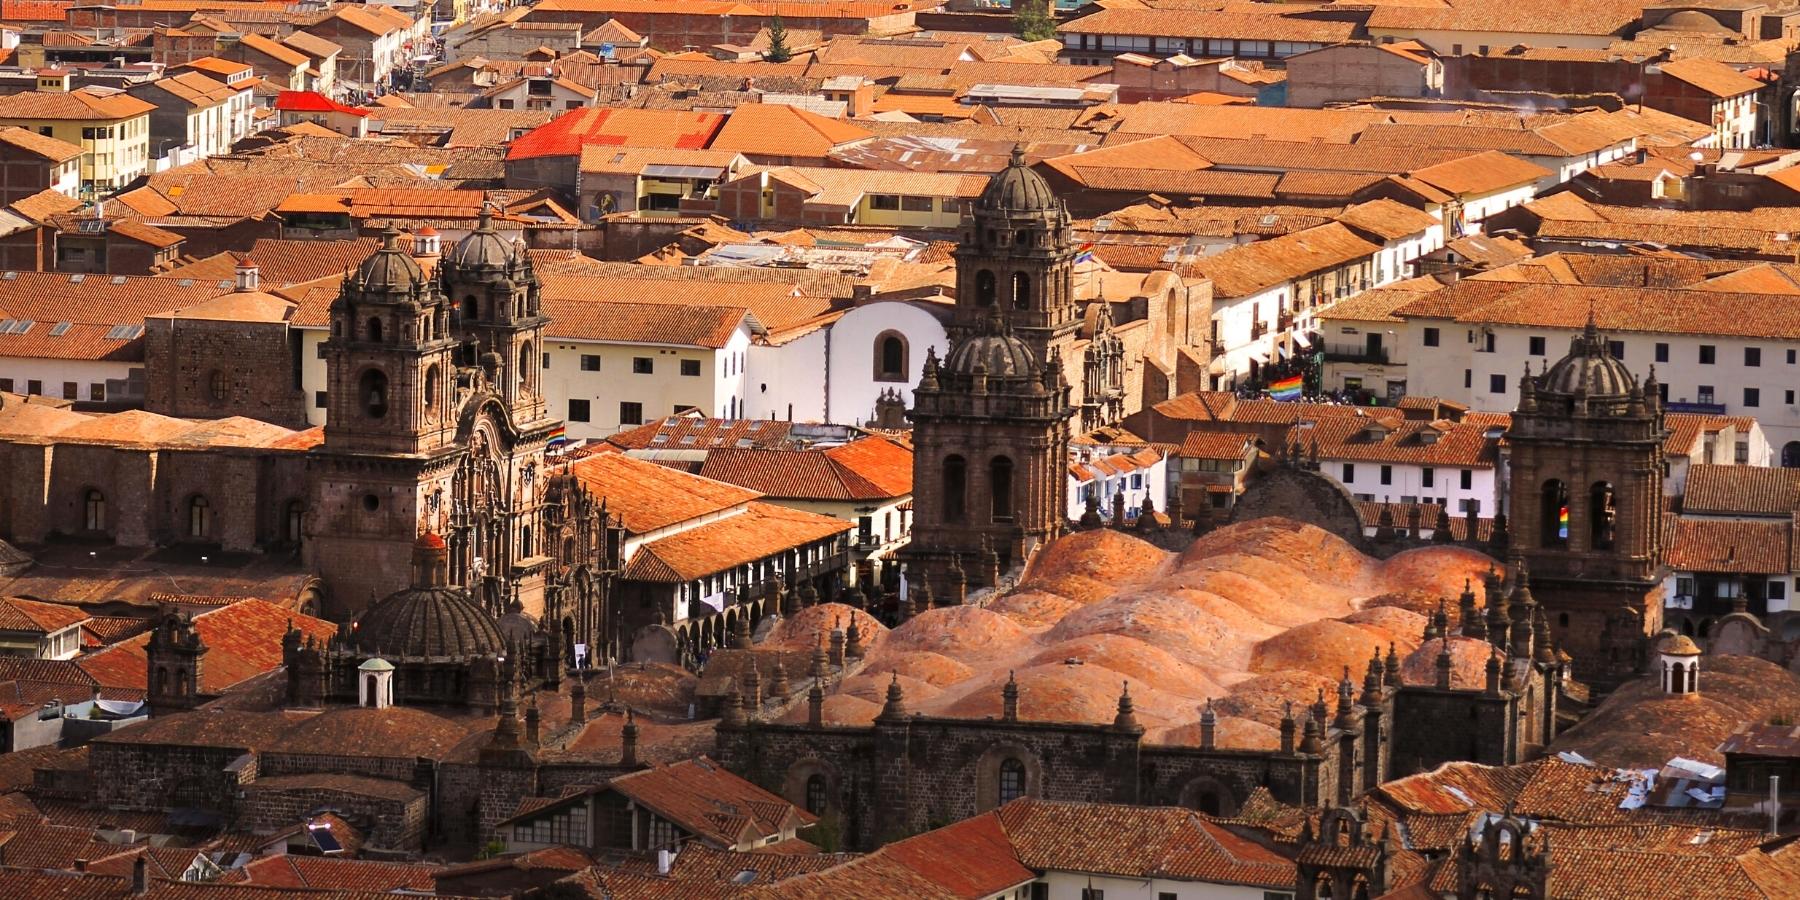 Explore Cusco, Machu Picchu and Sacred Valley 3 Days | Inca Trail Expeditions